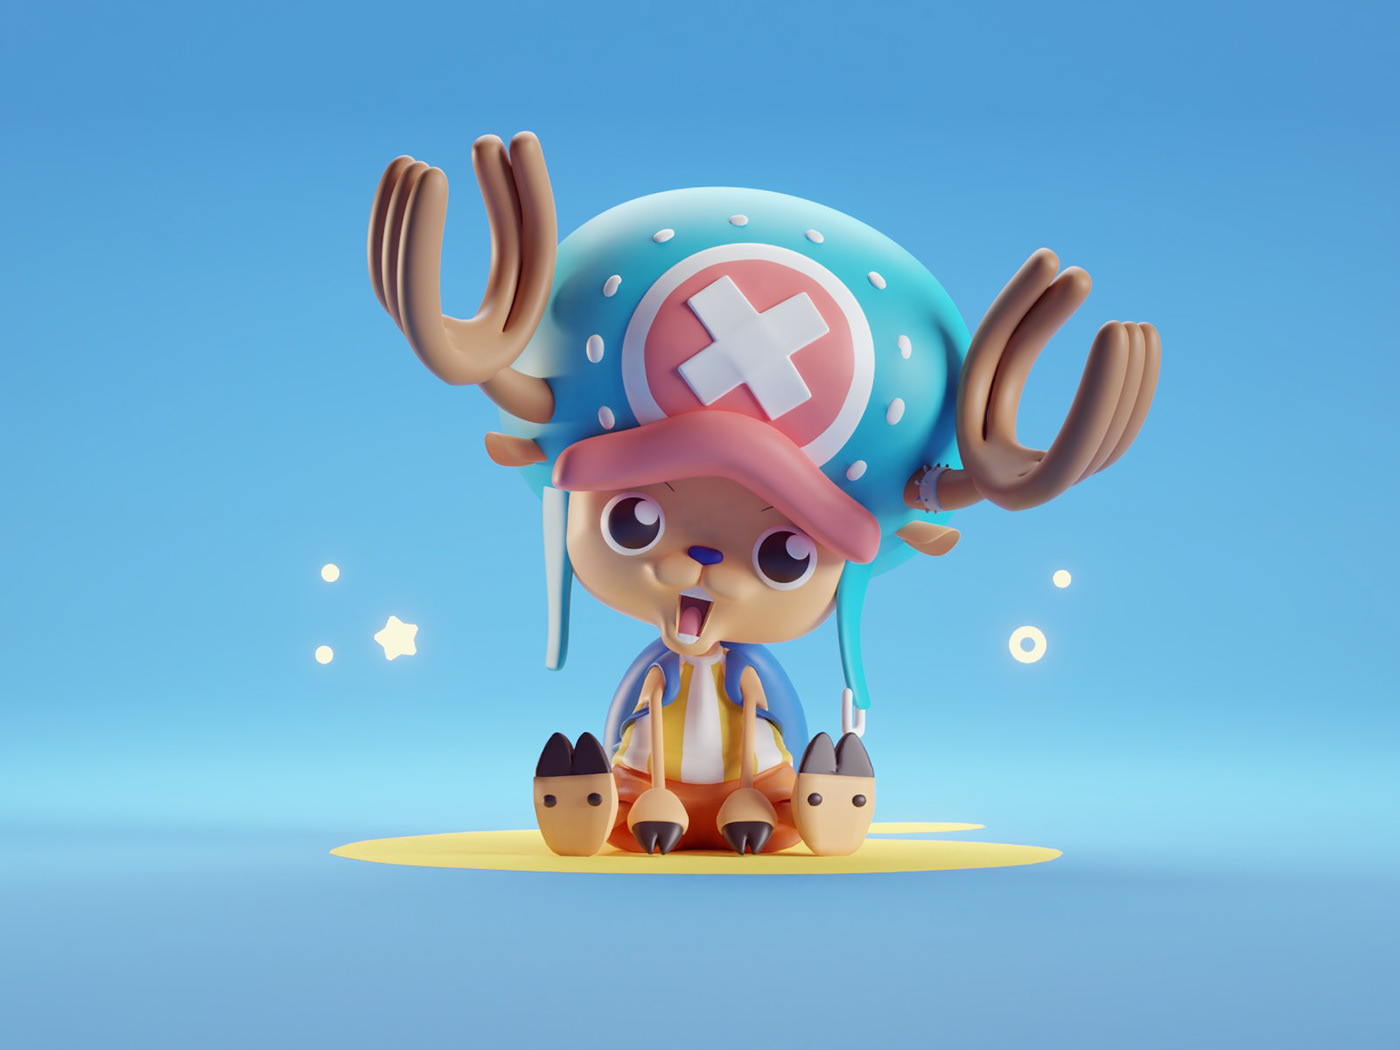 bustercall one piece Render blender b3d Character ILLUSTRATION  3D cute anime